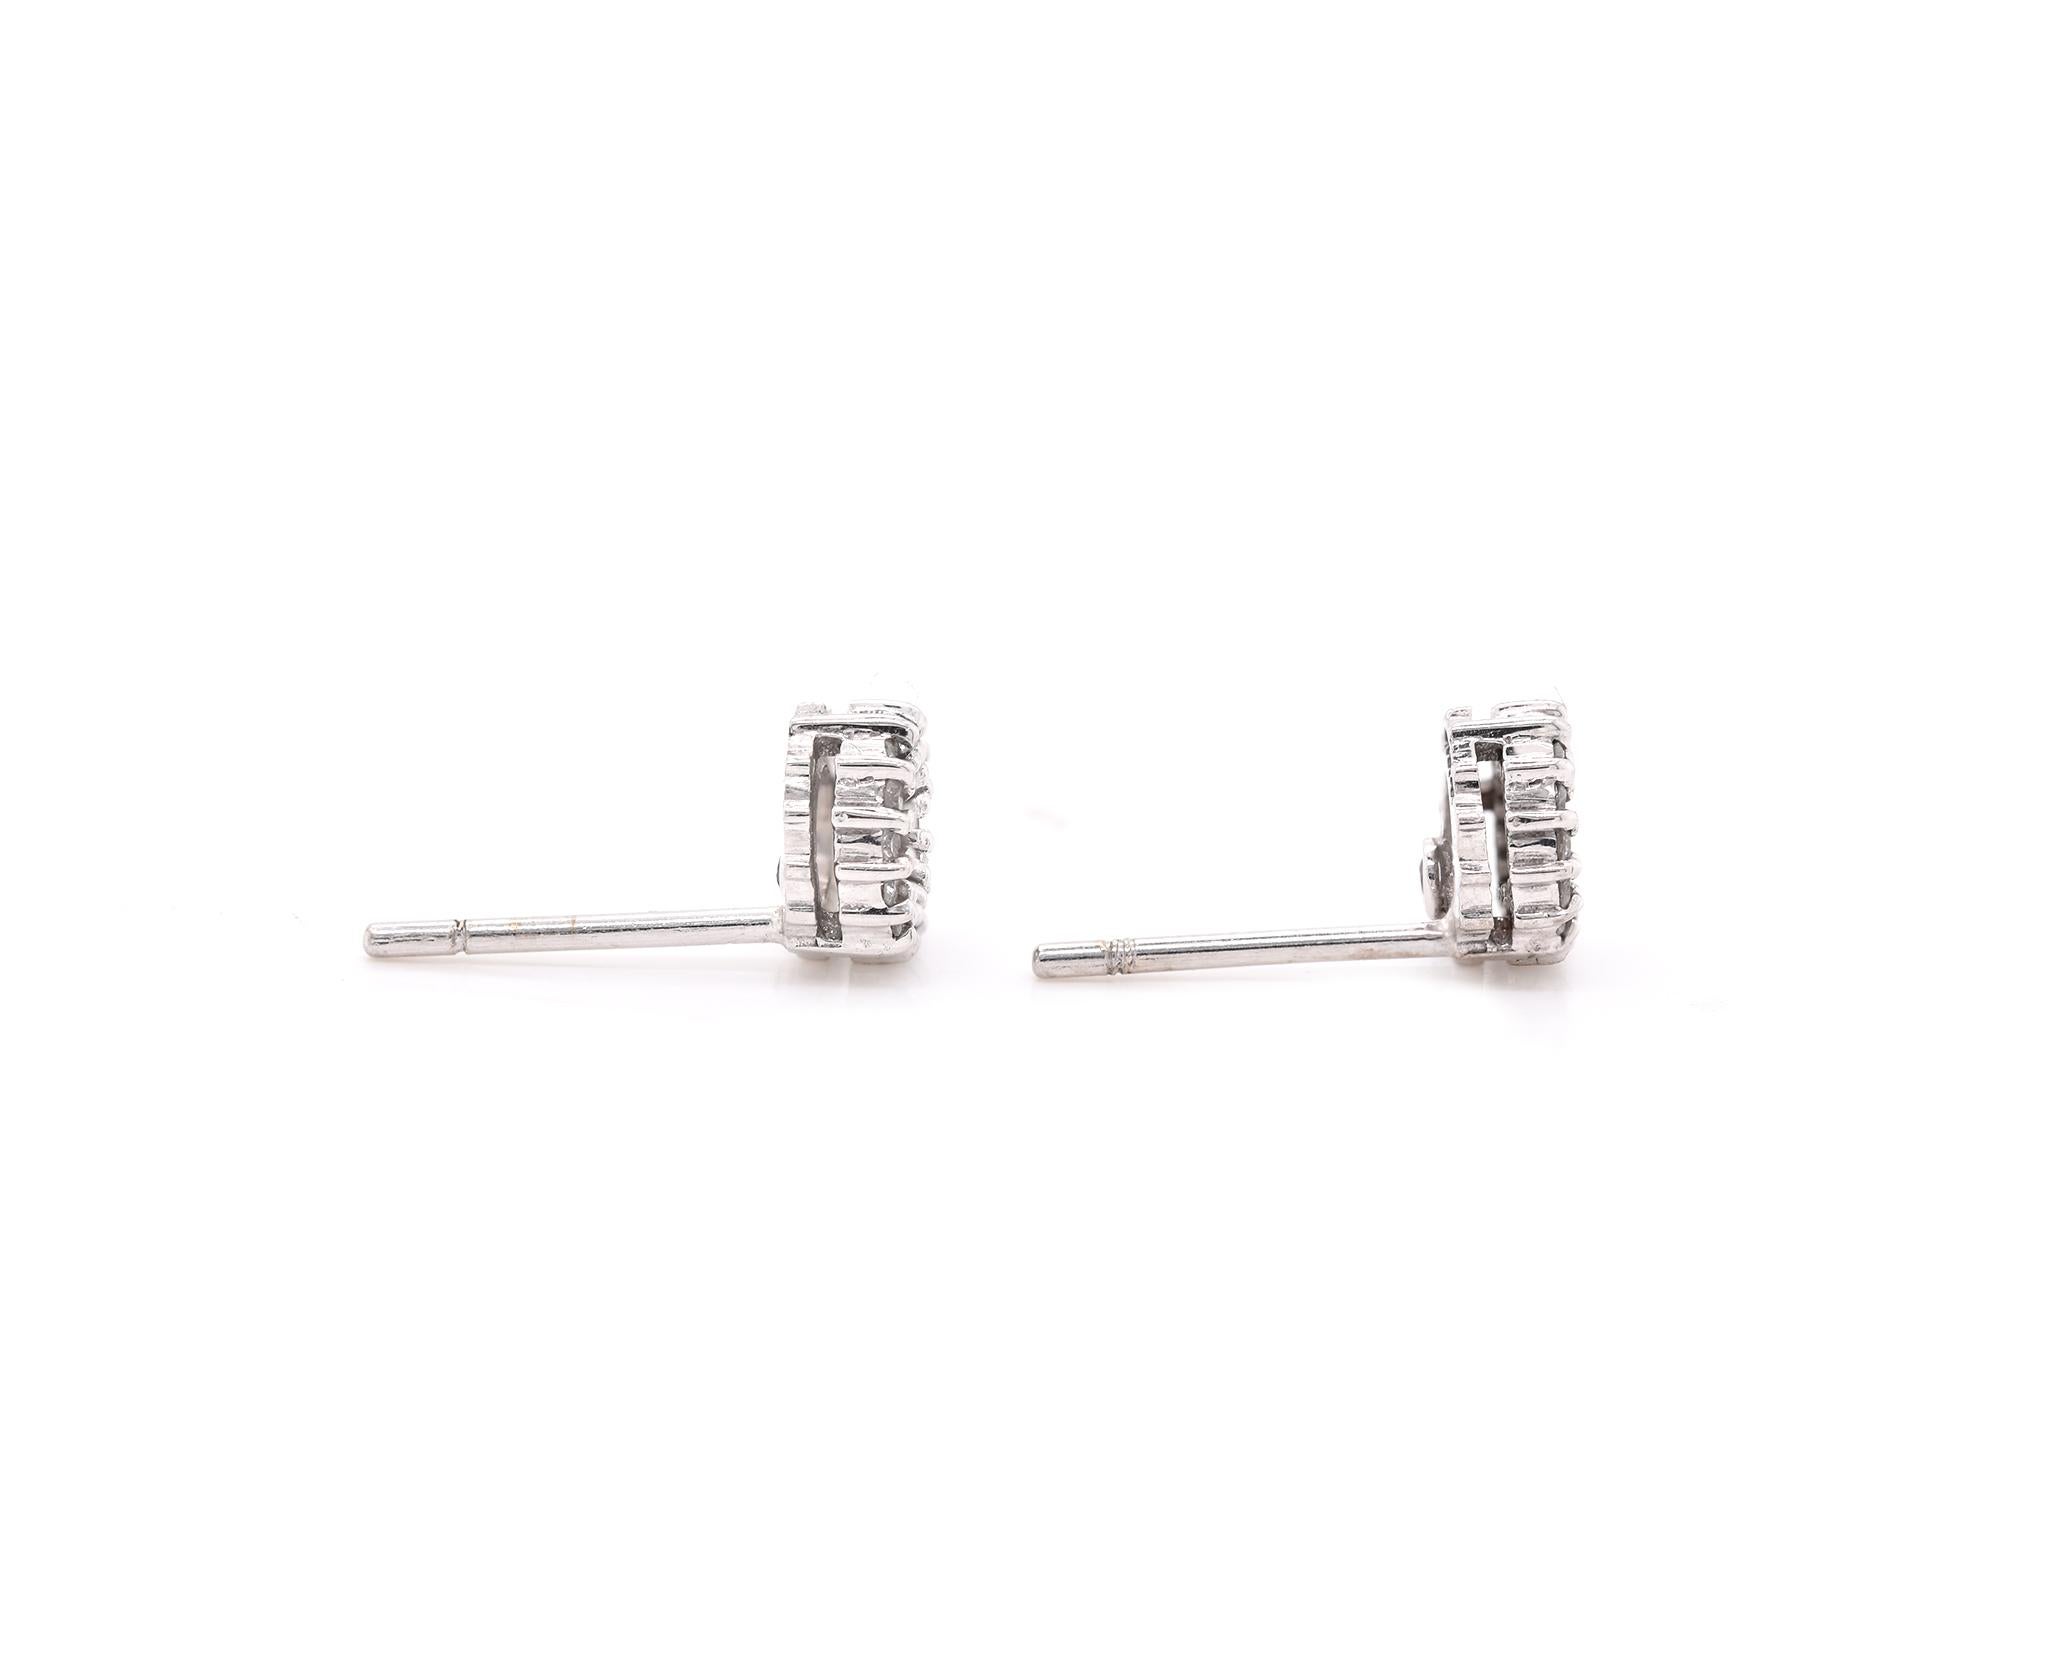 Designer: Roberto Coin 
Material: 18k white gold
Diamonds: 28 round brilliant cuts = .13cttw
Color: G
Clarity: VS2
Dimensions: earrings measure 6.6mm wide
Weight: 1.92 grams
